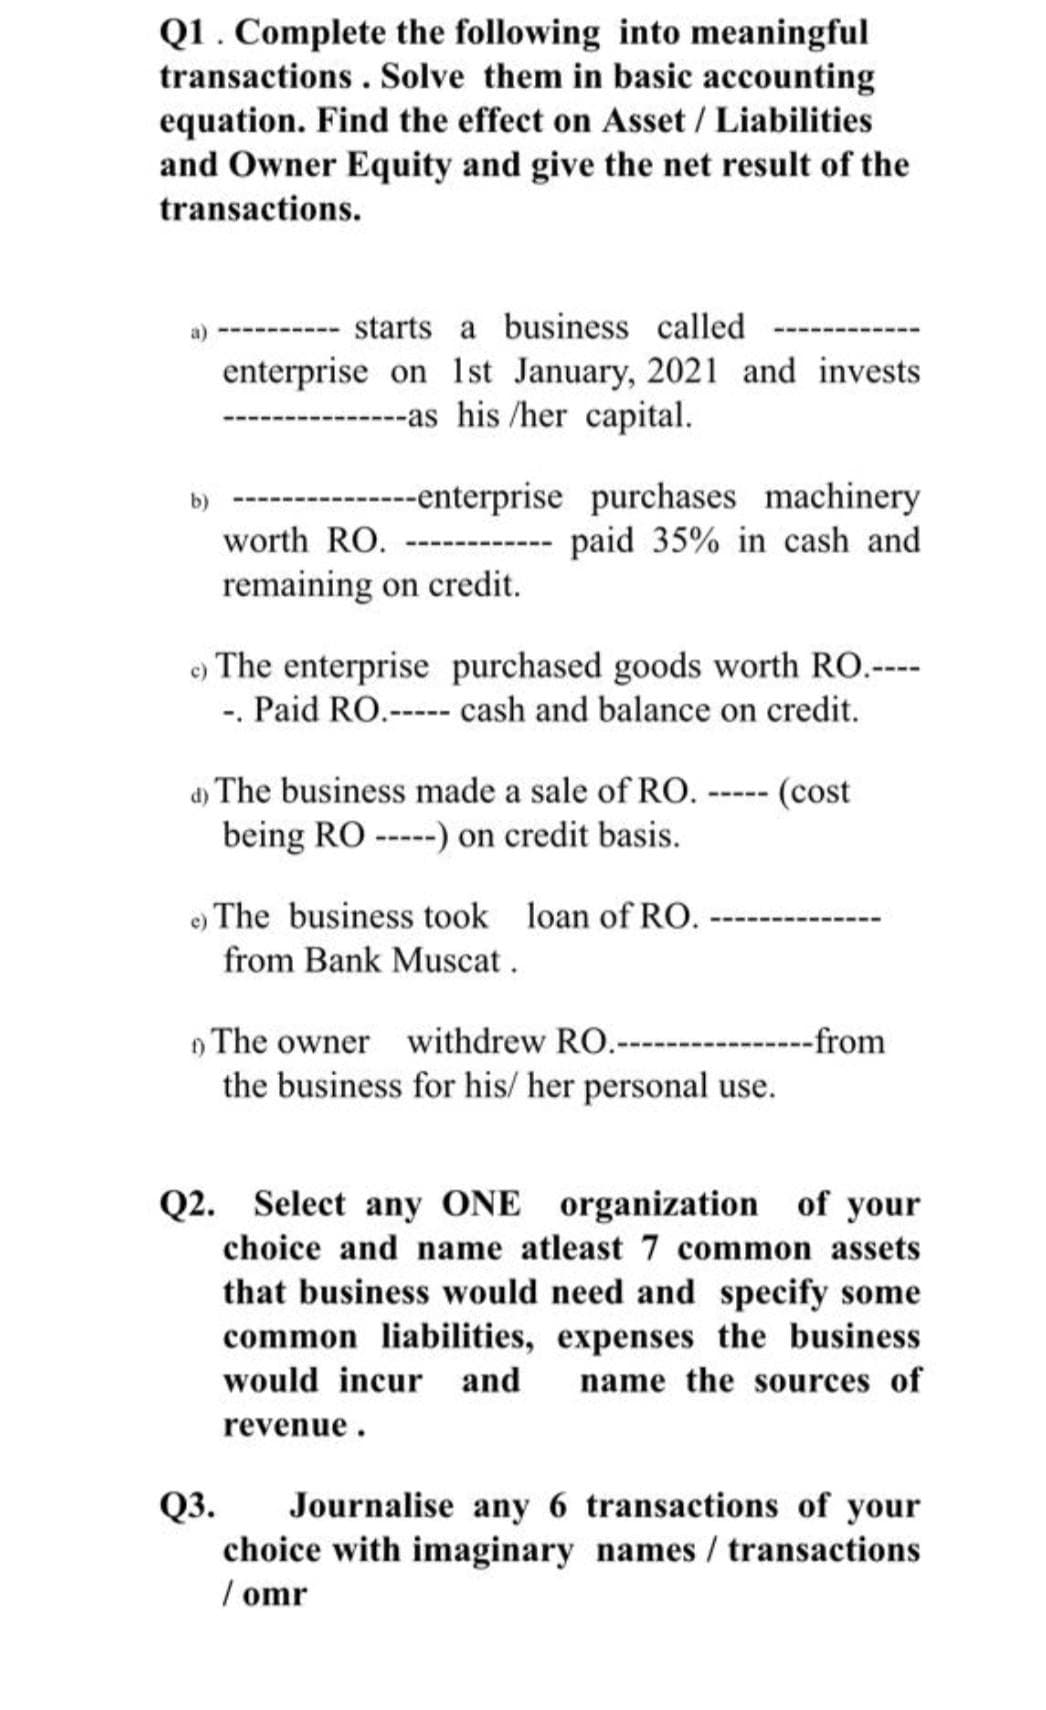 Q1. Complete the following into meaningful
transactions . Solve them in basic accounting
equation. Find the effect on Asset / Liabilities
and Owner Equity and give the net result of the
transactions.
starts a business called
enterprise on 1st January, 2021 and invests
--as his /her capital.
------enterprise purchases machinery
---- paid 35% in cash and
b)
worth RO.
remaining on credit.
e) The enterprise purchased goods worth RO.----
-. Paid RO.----- cash and balance on credit.
d) The business made a sale of RO. ----- (cost
being RO -----) on credit basis.
e) The business took loan of RO.
from Bank Muscat.
) The owner withdrew RO.-- -----from
the business for his/ her personal use.
Q2. Select any ONE organization of your
choice and name atleast 7 common assets
that business would need and specify some
common liabilities, expenses the business
would incur and
name the sources of
revenue.
Journalise any 6 transactions of your
choice with imaginary names / transactions
/ omr
Q3.
